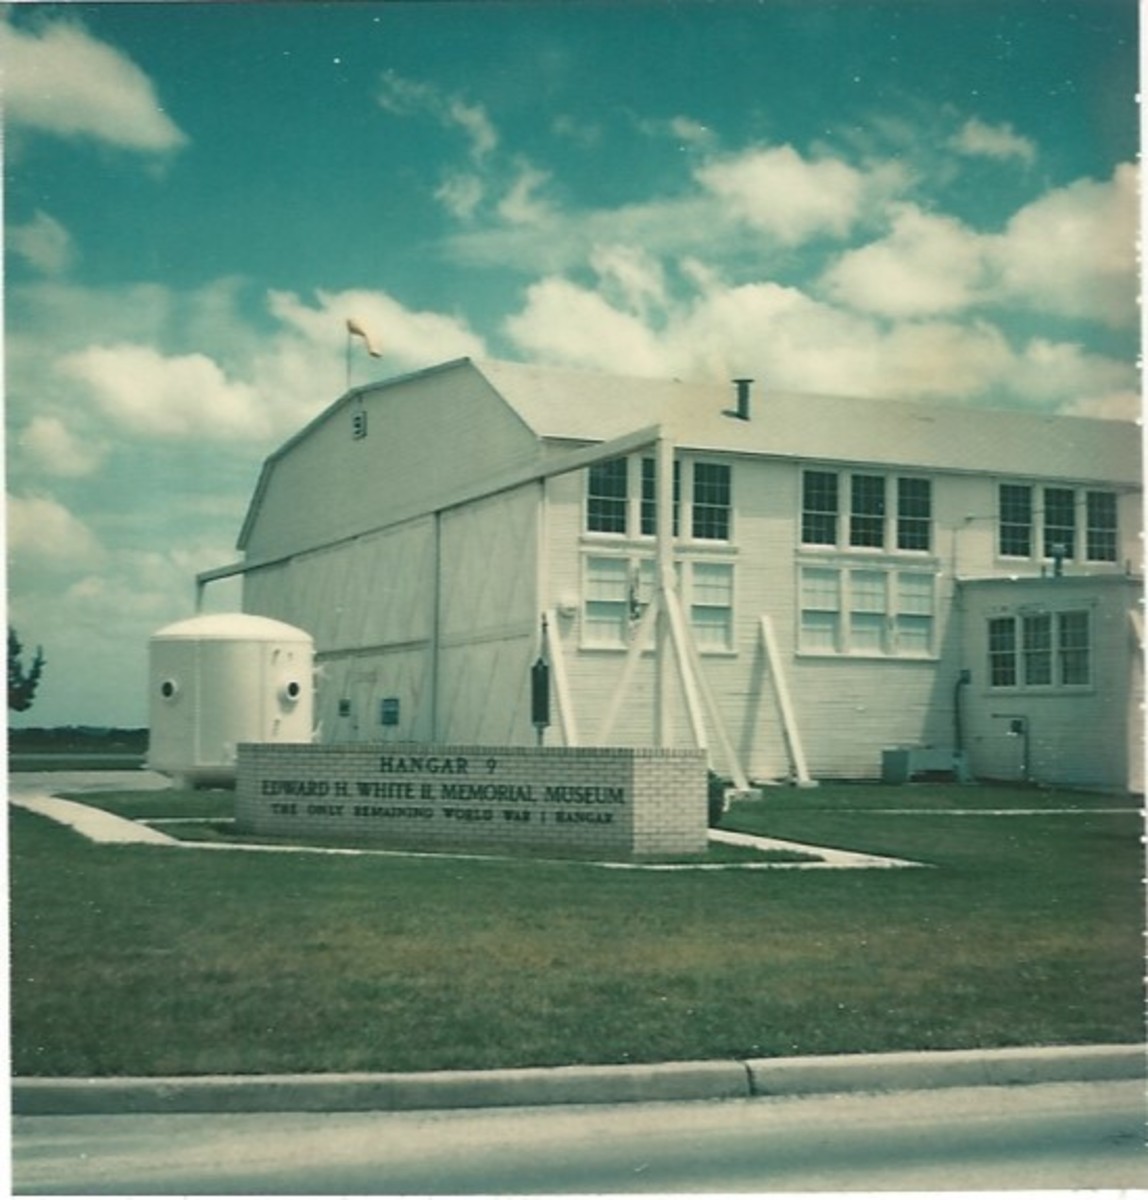 The Edward H. White II Memorial Museum, Brooks AFB, TX.  1977. Named in honor of Lt. Colonel Edward H. White II, who died in the Apollo 1 fire. 